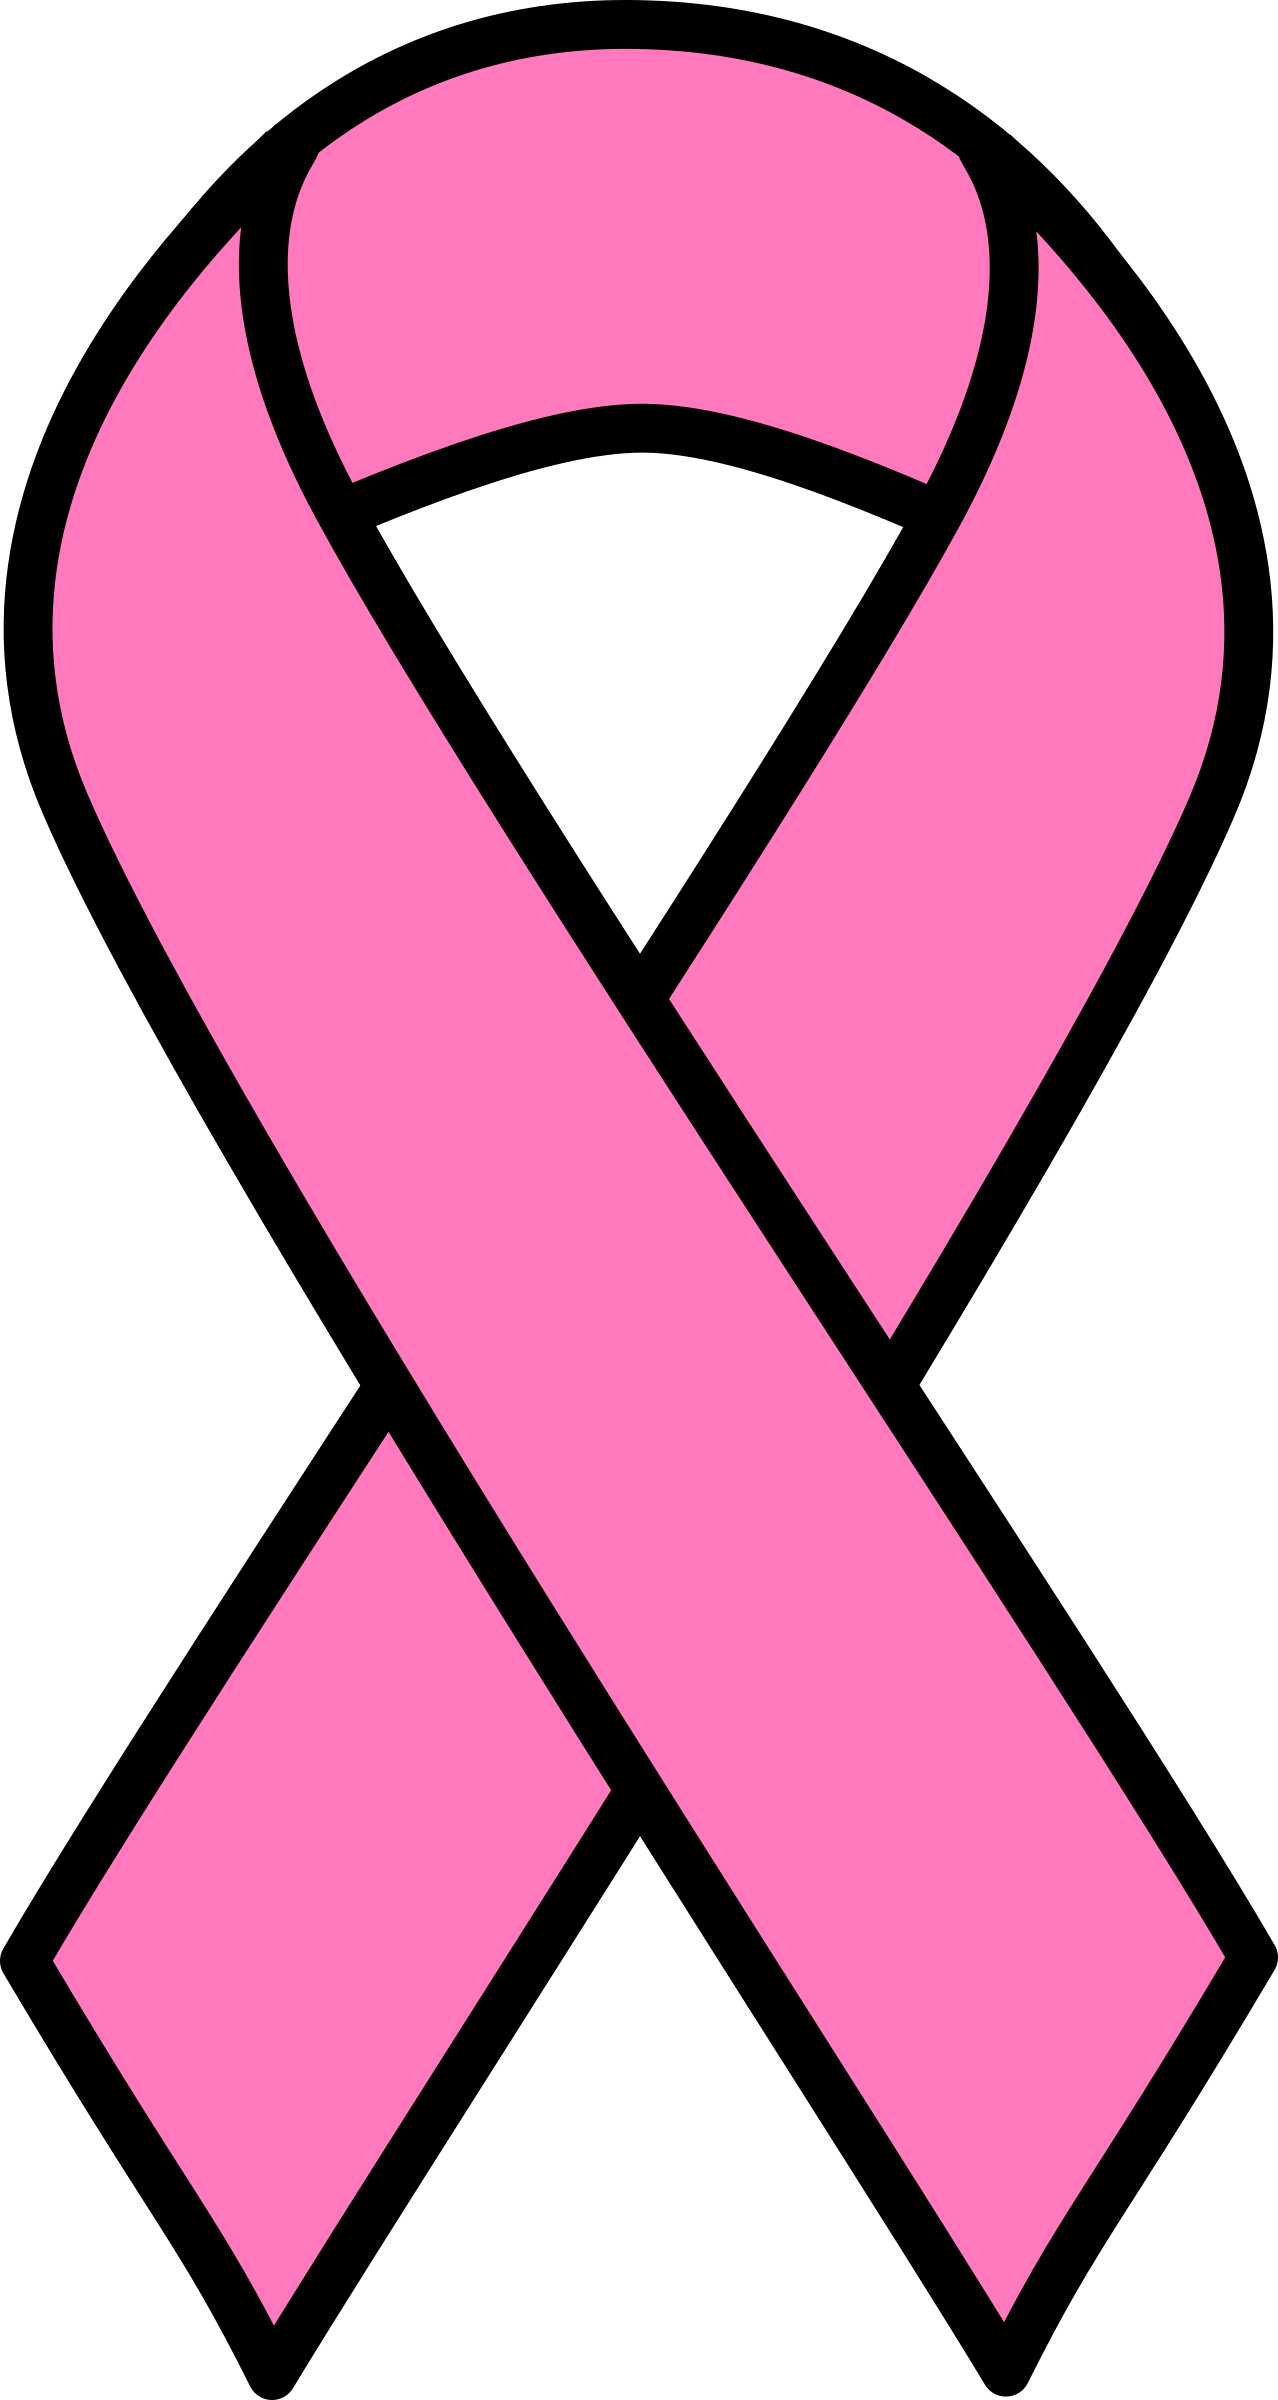 Breast cancer ribbon template